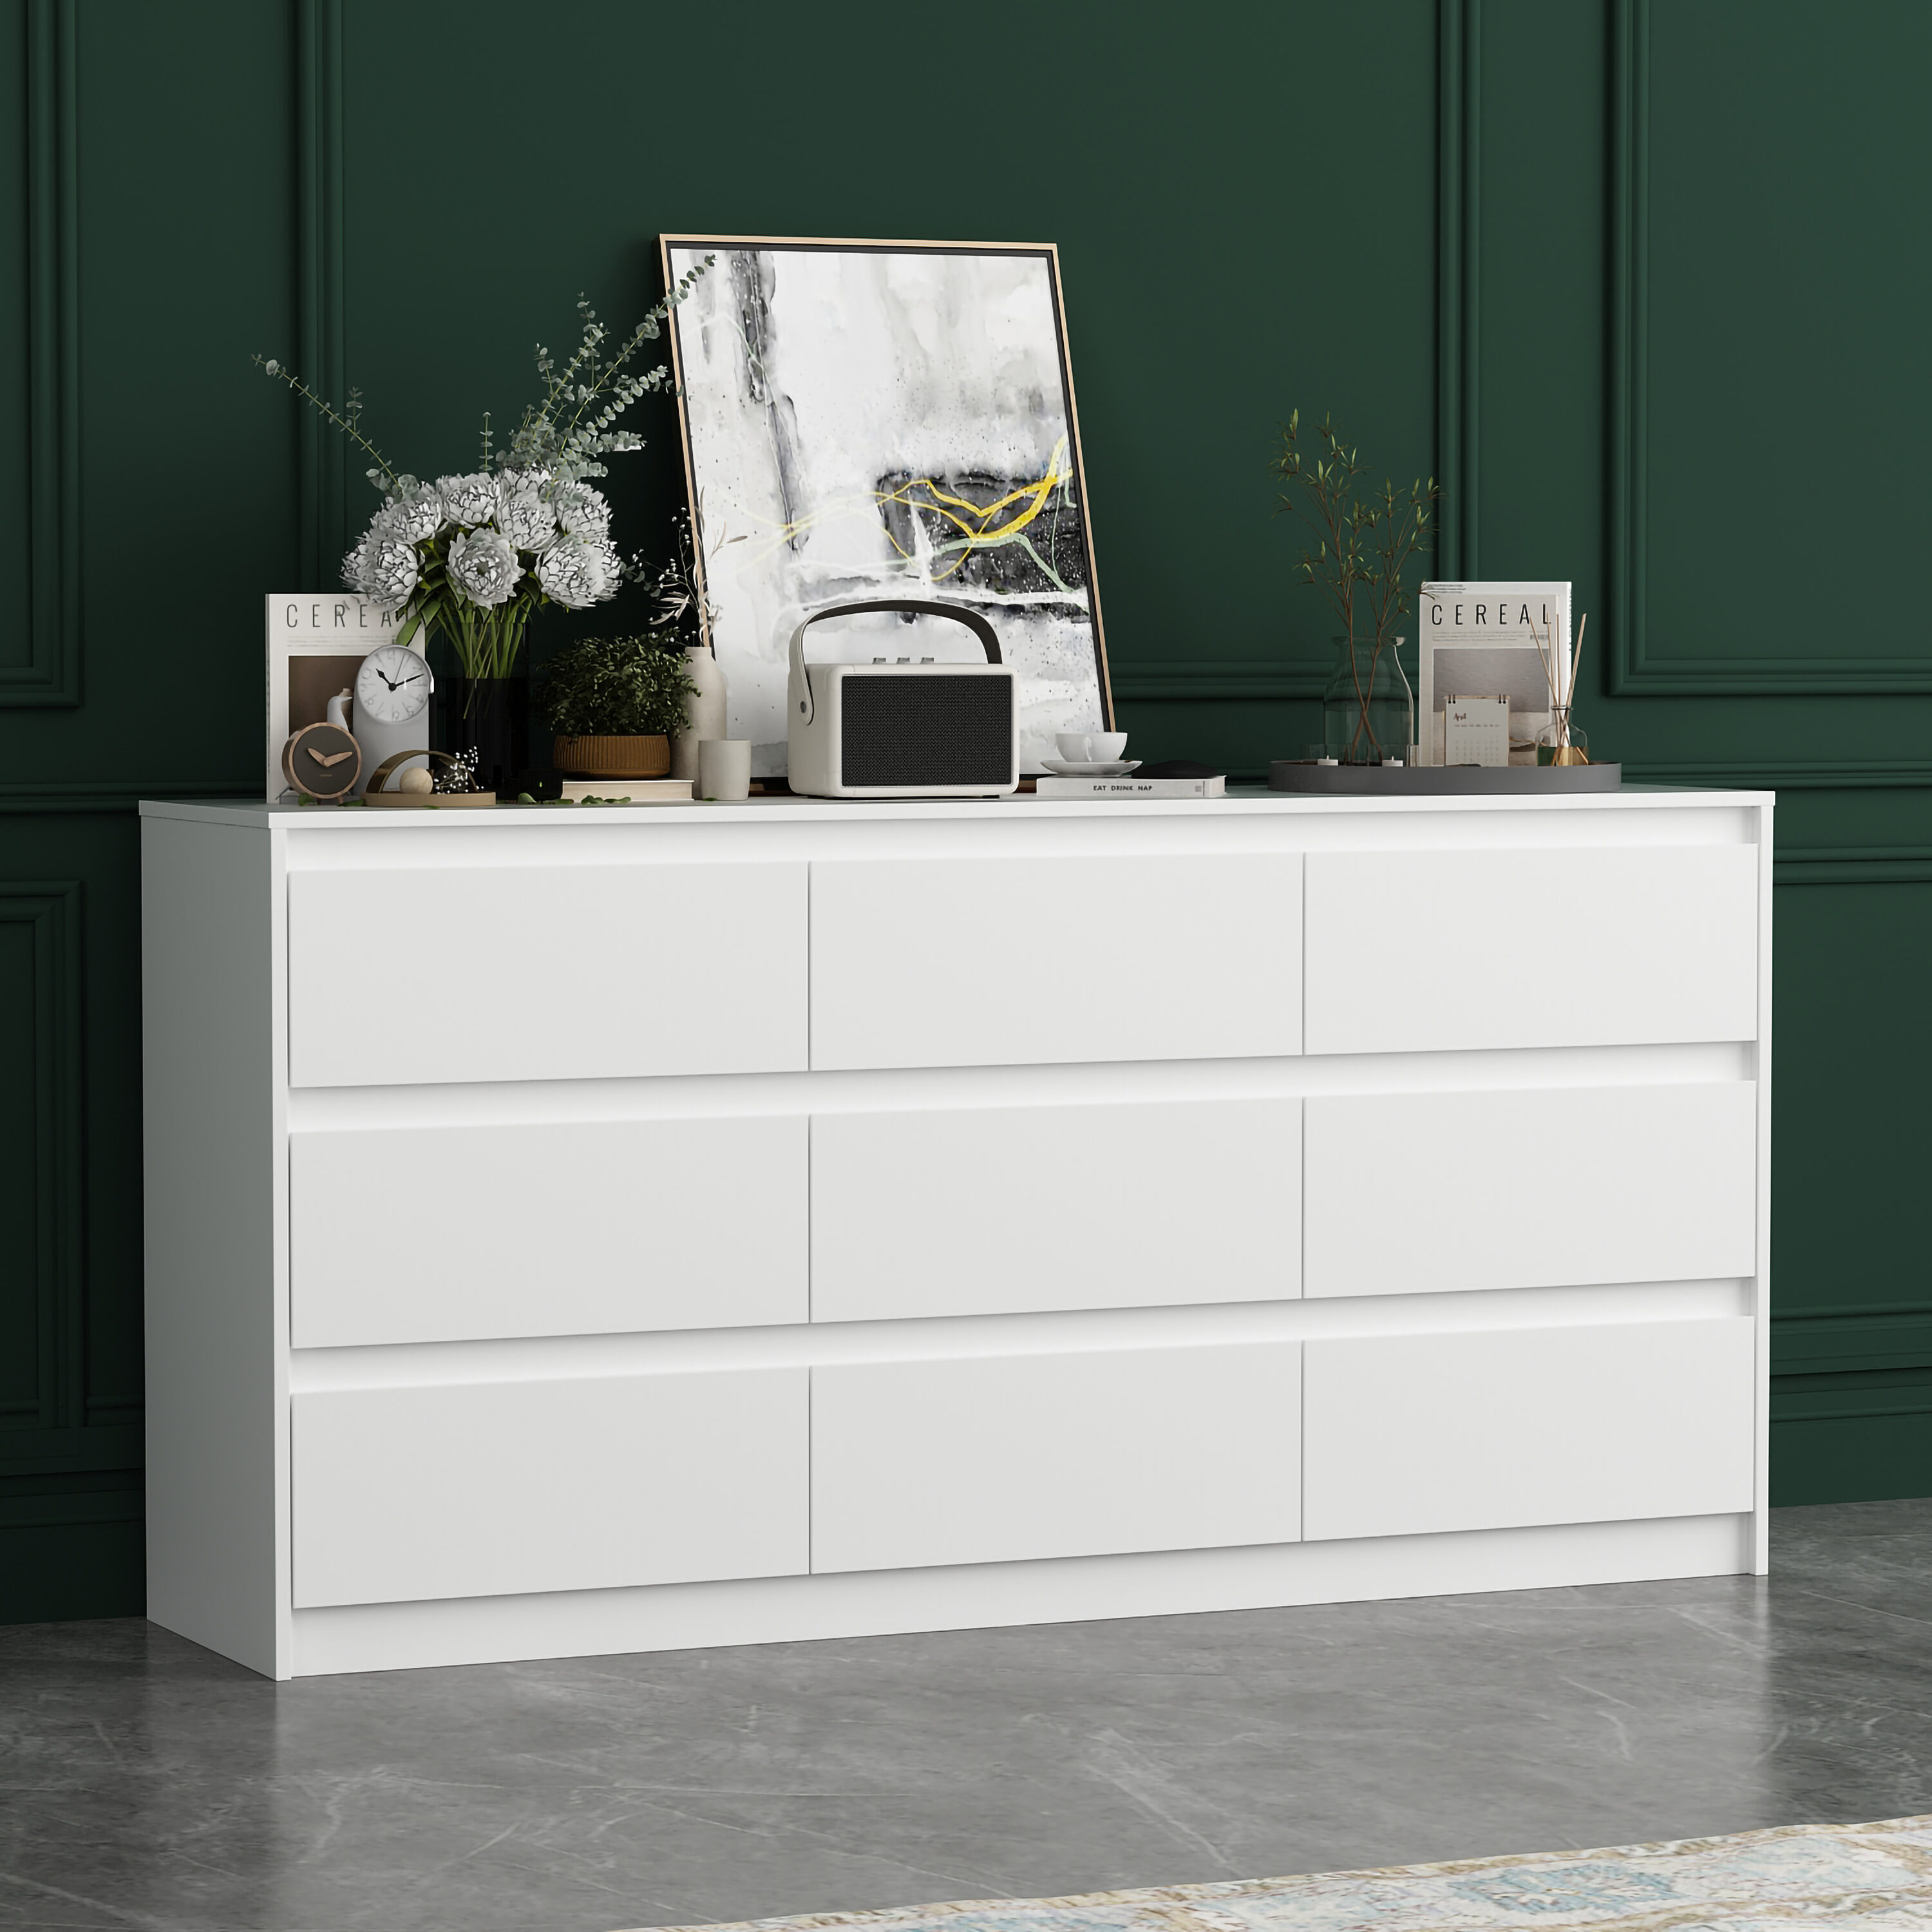 FUFU&GAGA Modern White 9-Drawer Dresser | Spacious Storage | Easy Assembly | Contemporary Style | 63-in x 15.7-in x 31.5-in | Composite Material -  LJY-KF250020-01